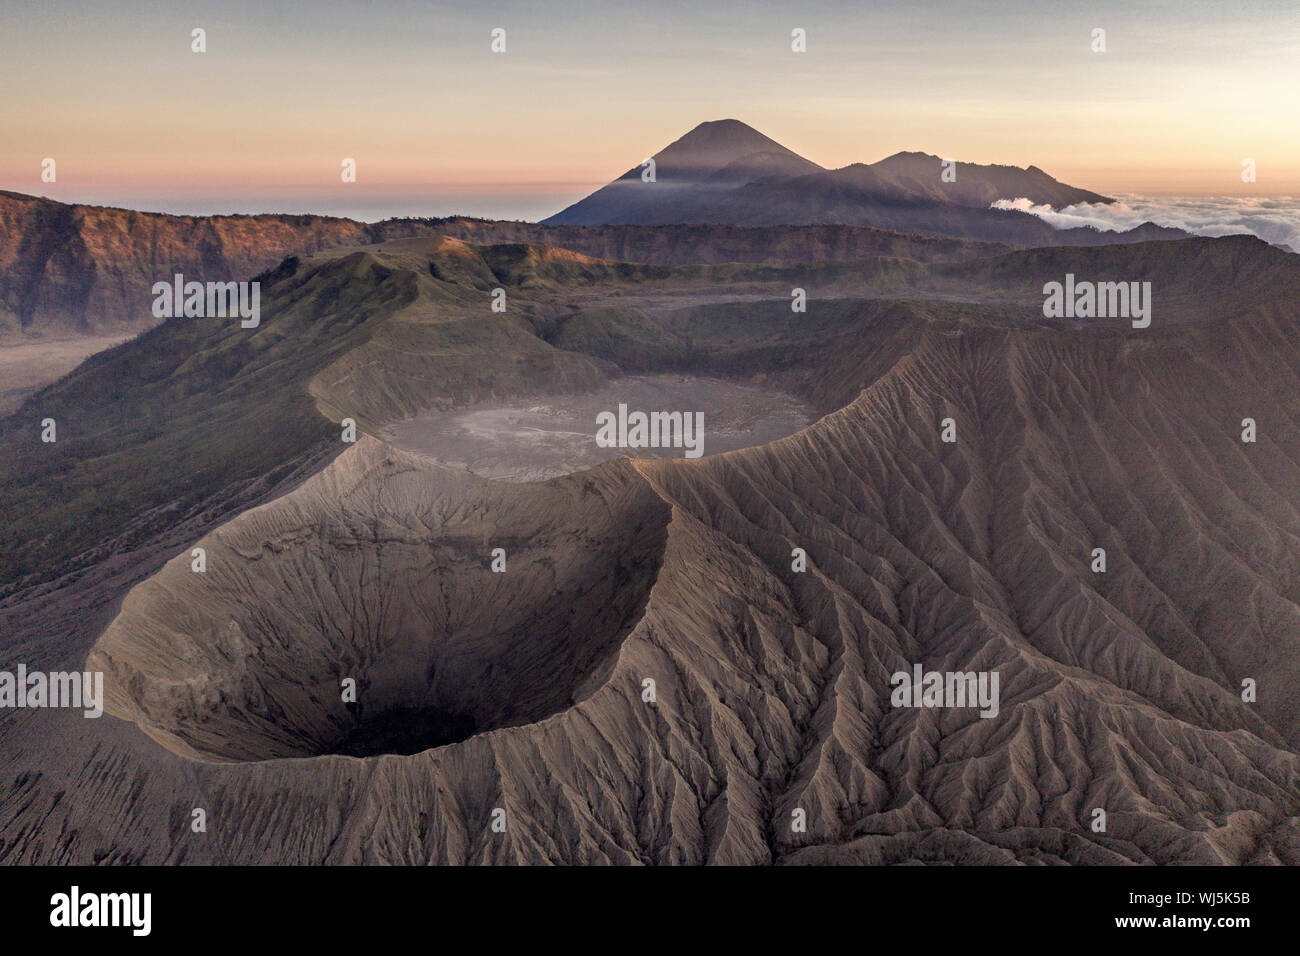 Mount Bromo volcano in the National Park in Eastern Java, Indonesia Stock Photo